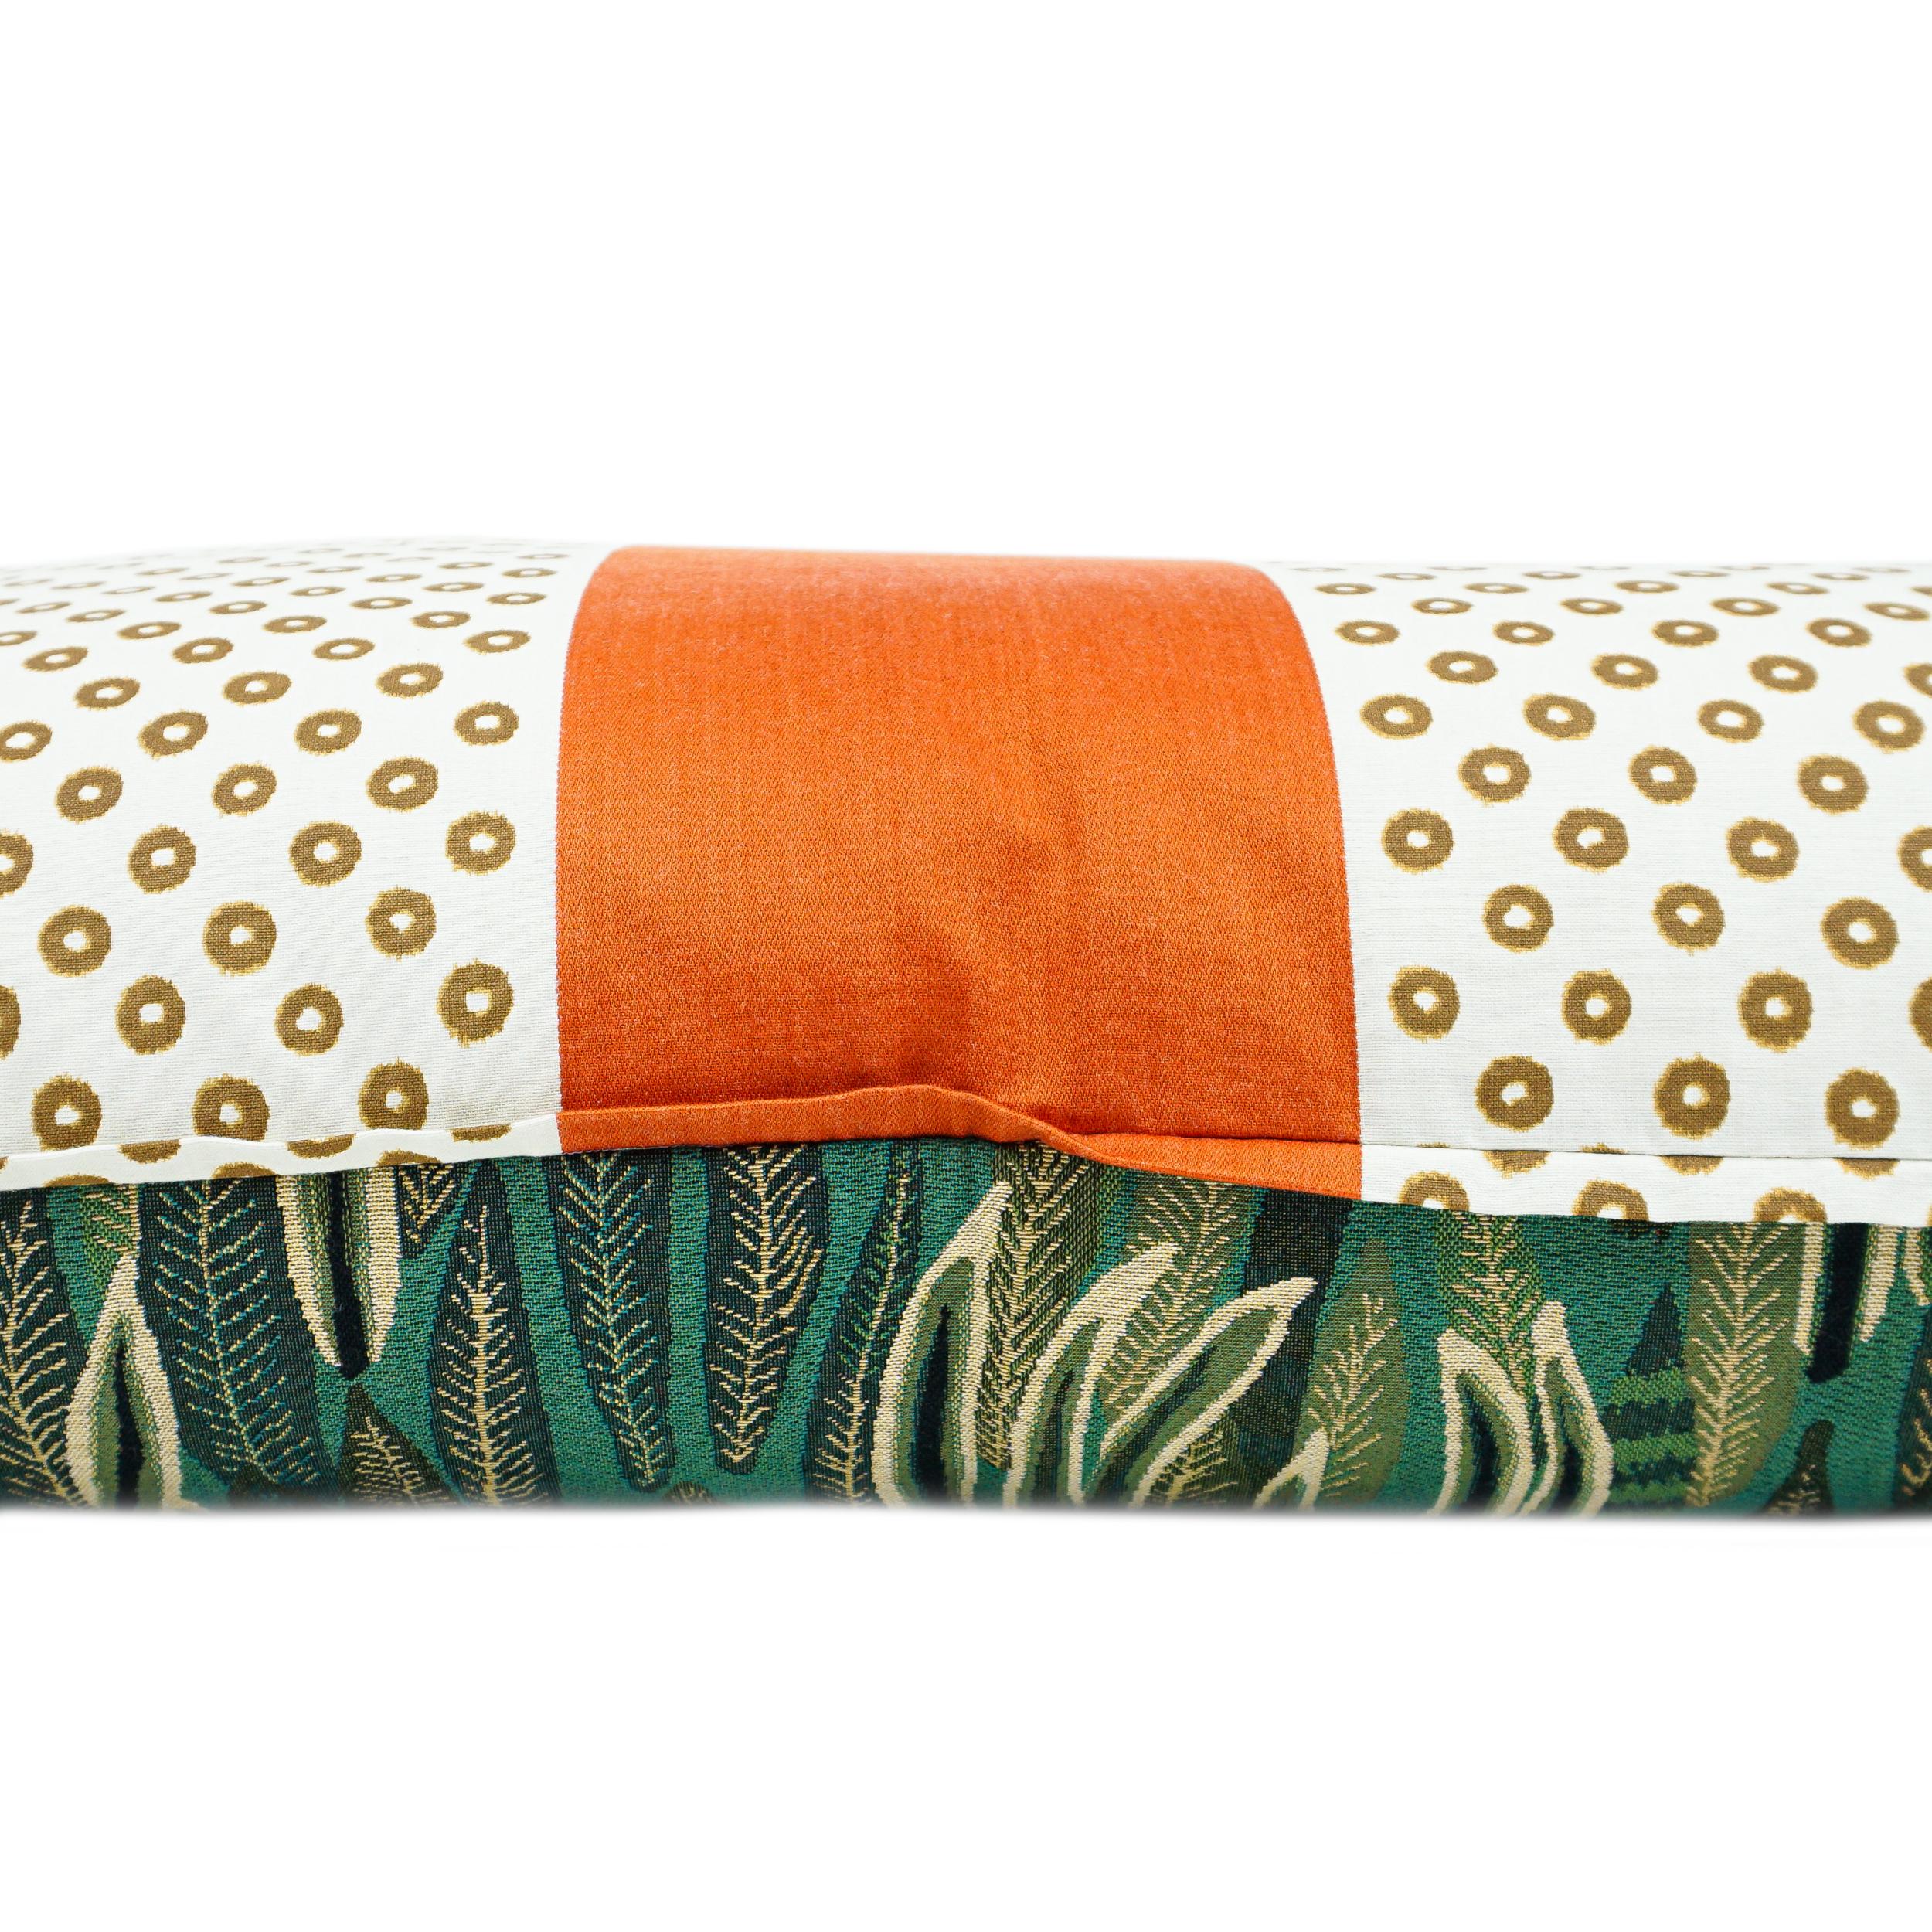 Extra Large Reversible Throw Pillow with Orange Stripes, Ikat Dots and Leaves For Sale 7